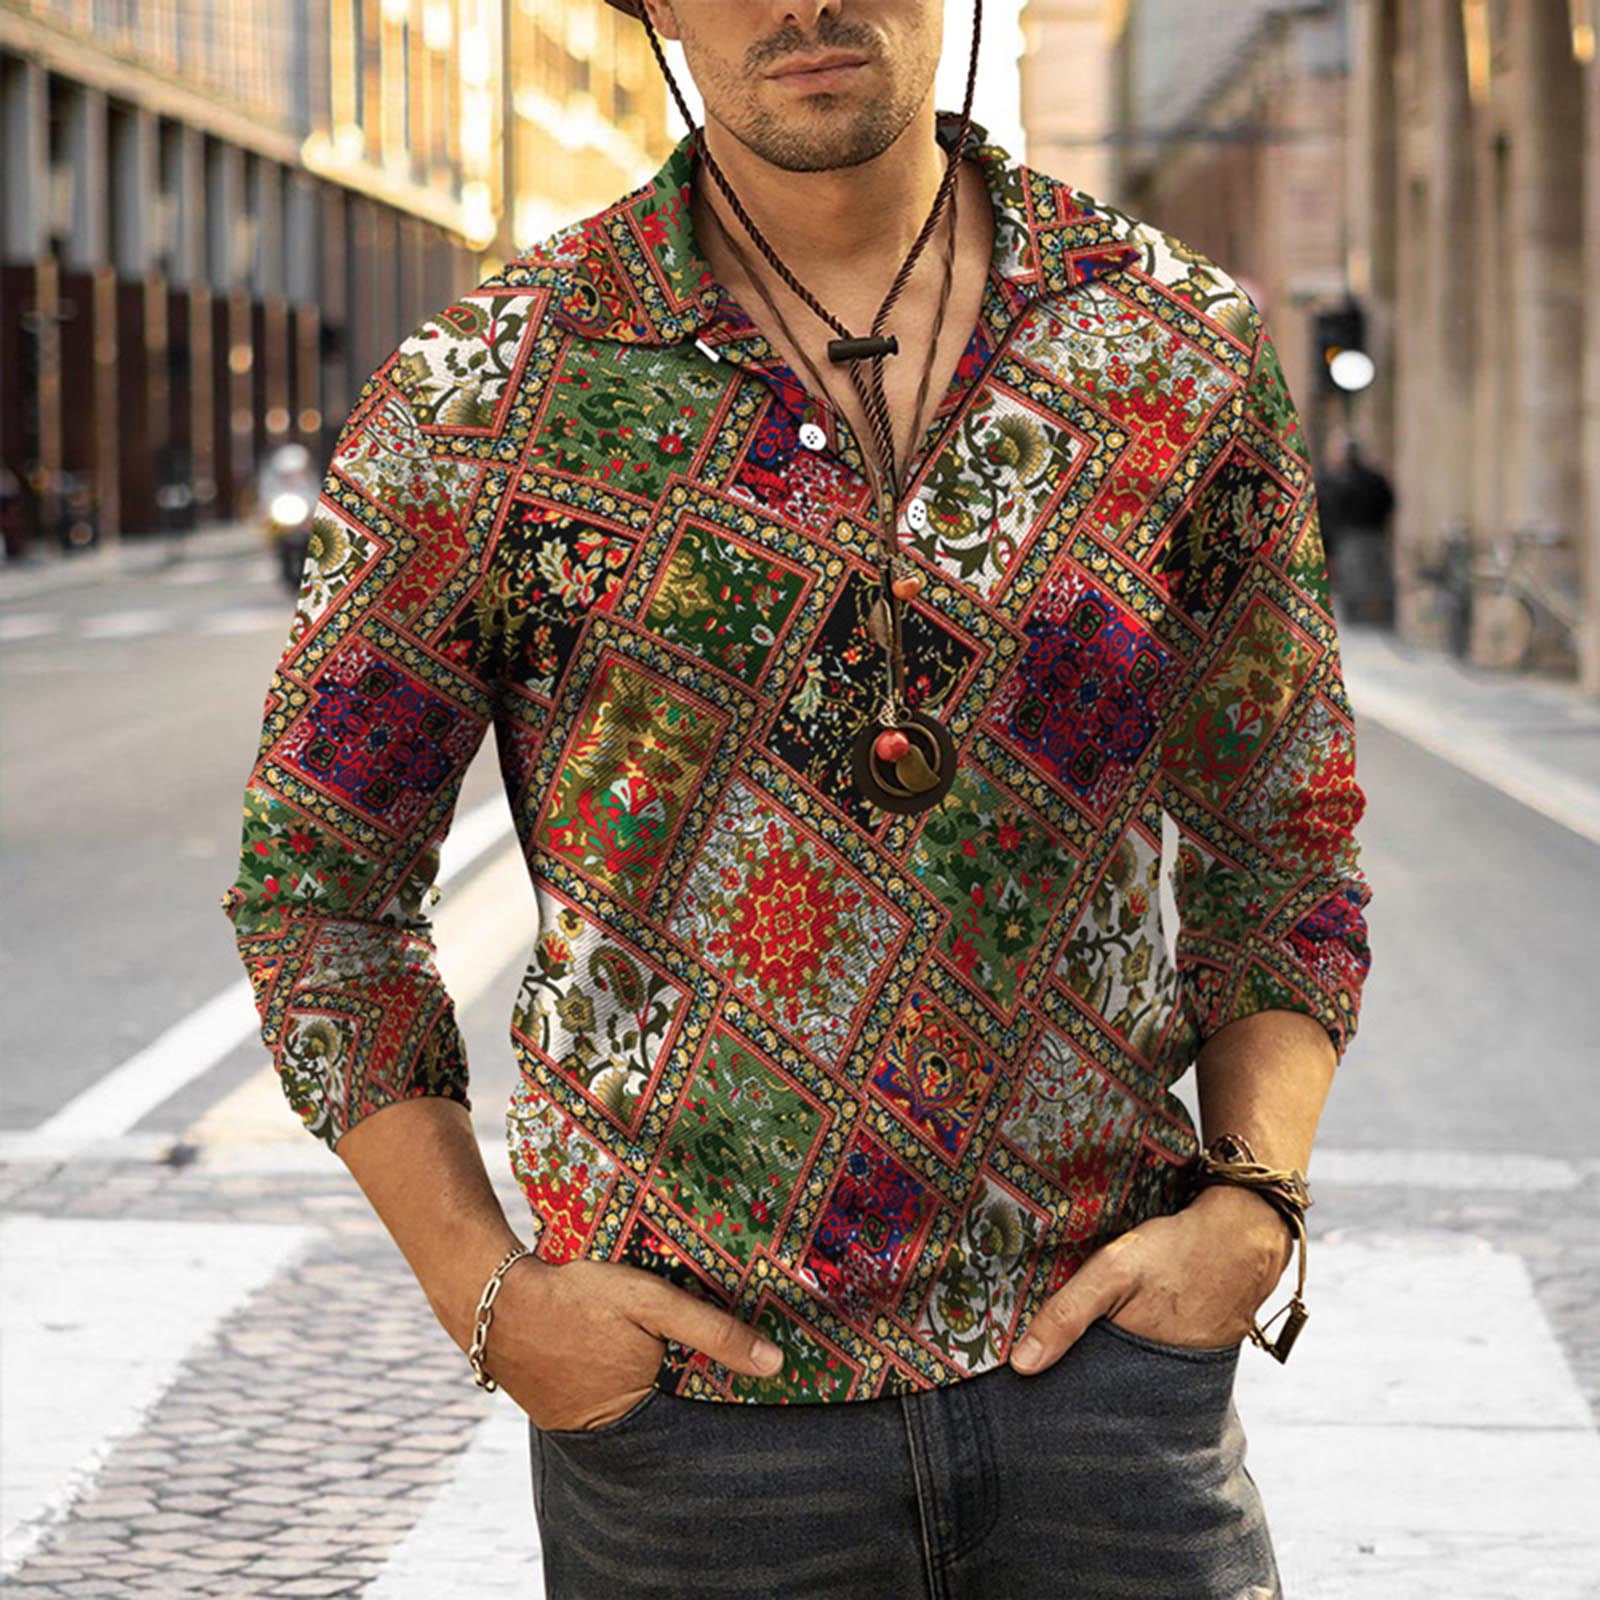 RYRJJ Men's Long Sleeve Polo Shirt Ethnic Aztec Print Tops Blouse Casual  Button Up Turn Down Collar Sports Workout Muscle Shirts(Multicolor,XXL)